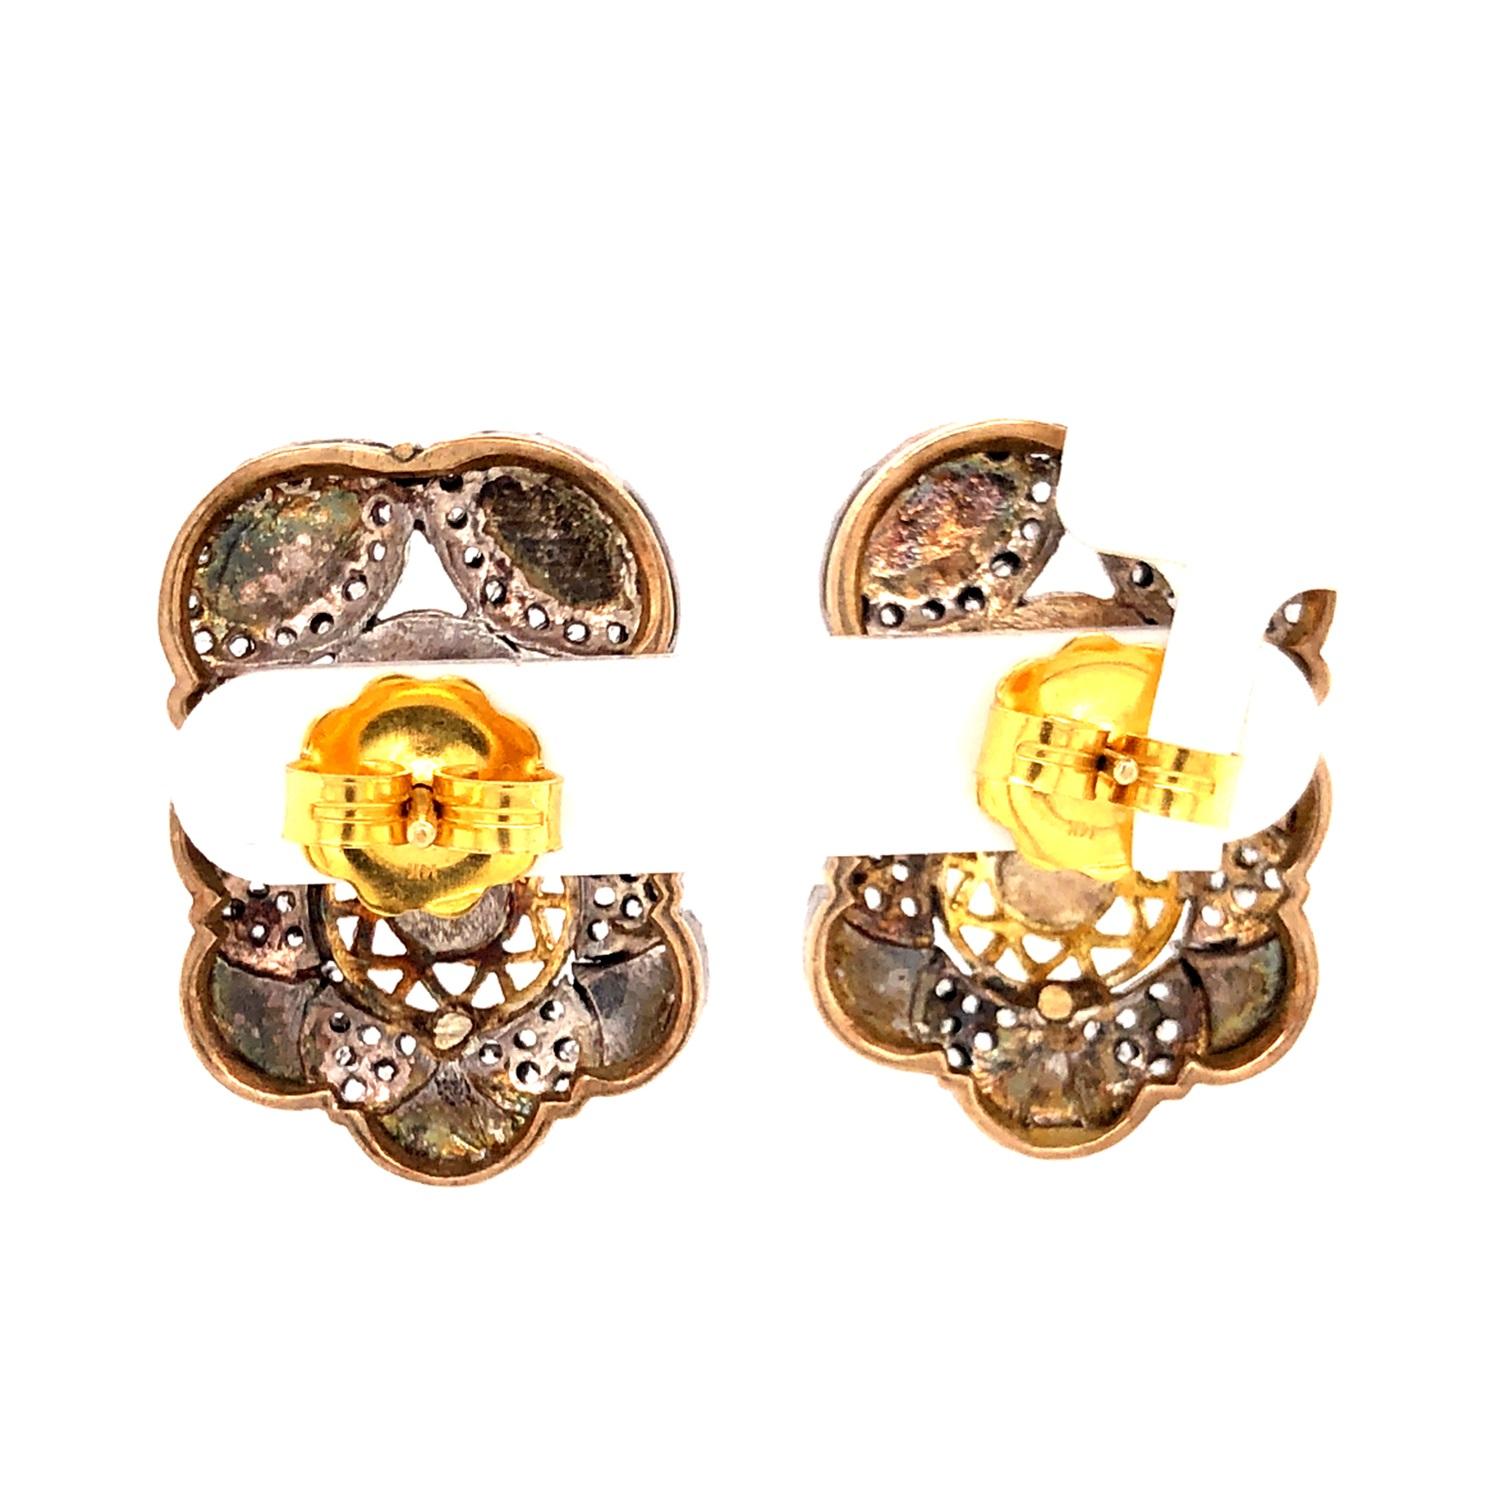 Rose Cut Diamonds Studs With Filigree Work Made In Silver & 18k Gold In New Condition For Sale In New York, NY